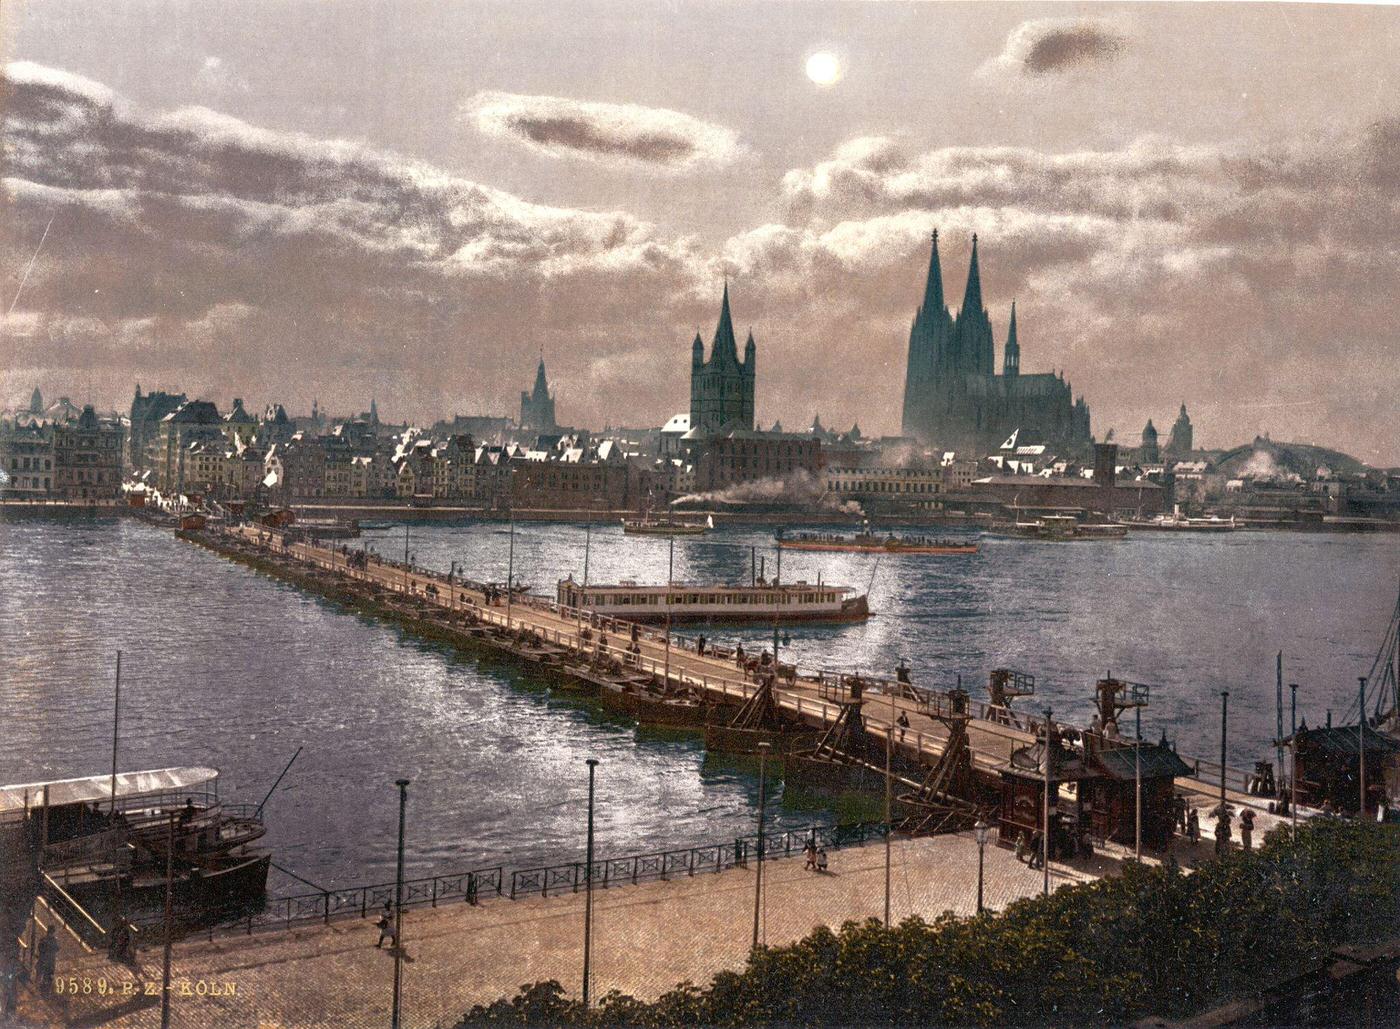 Moonlight across the river Rhine with the Cologne Cathedral, Cologne, Germany.